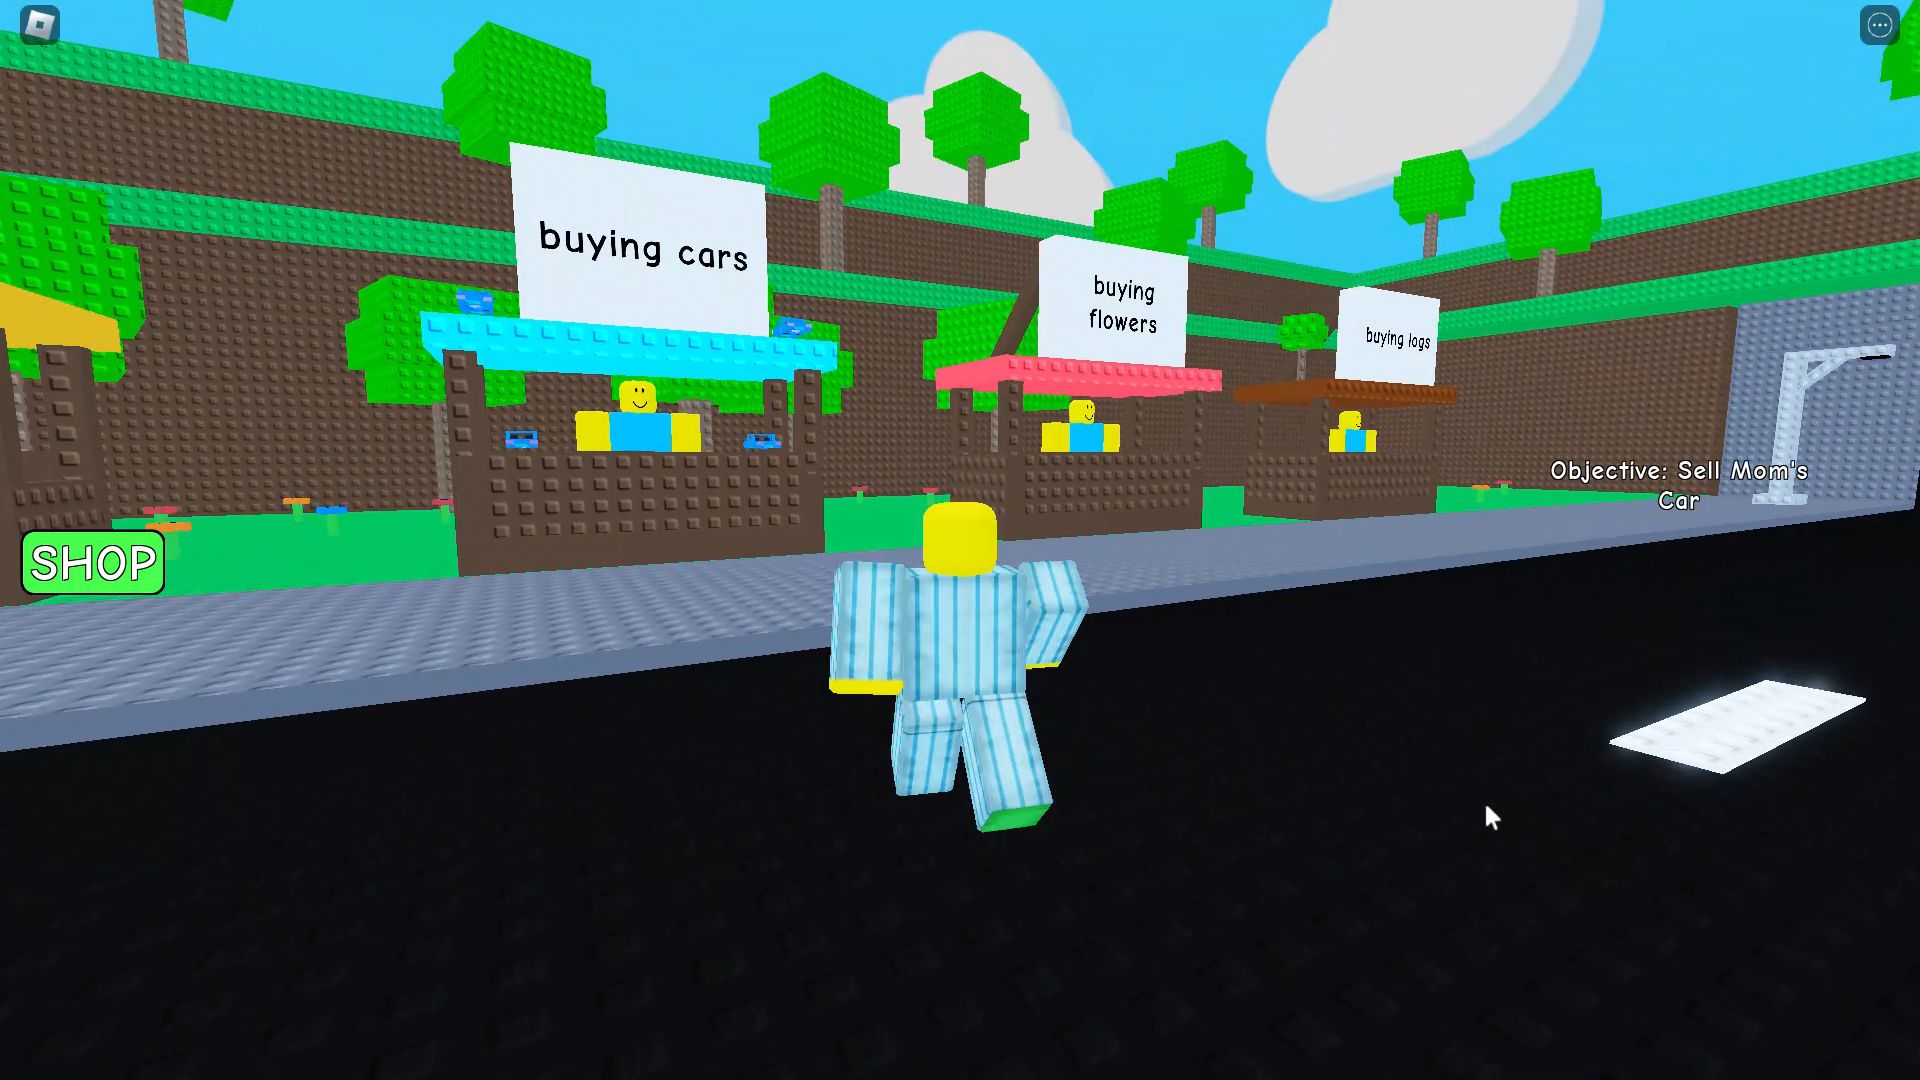 Roblox Need More Money - Selling Mom's Car